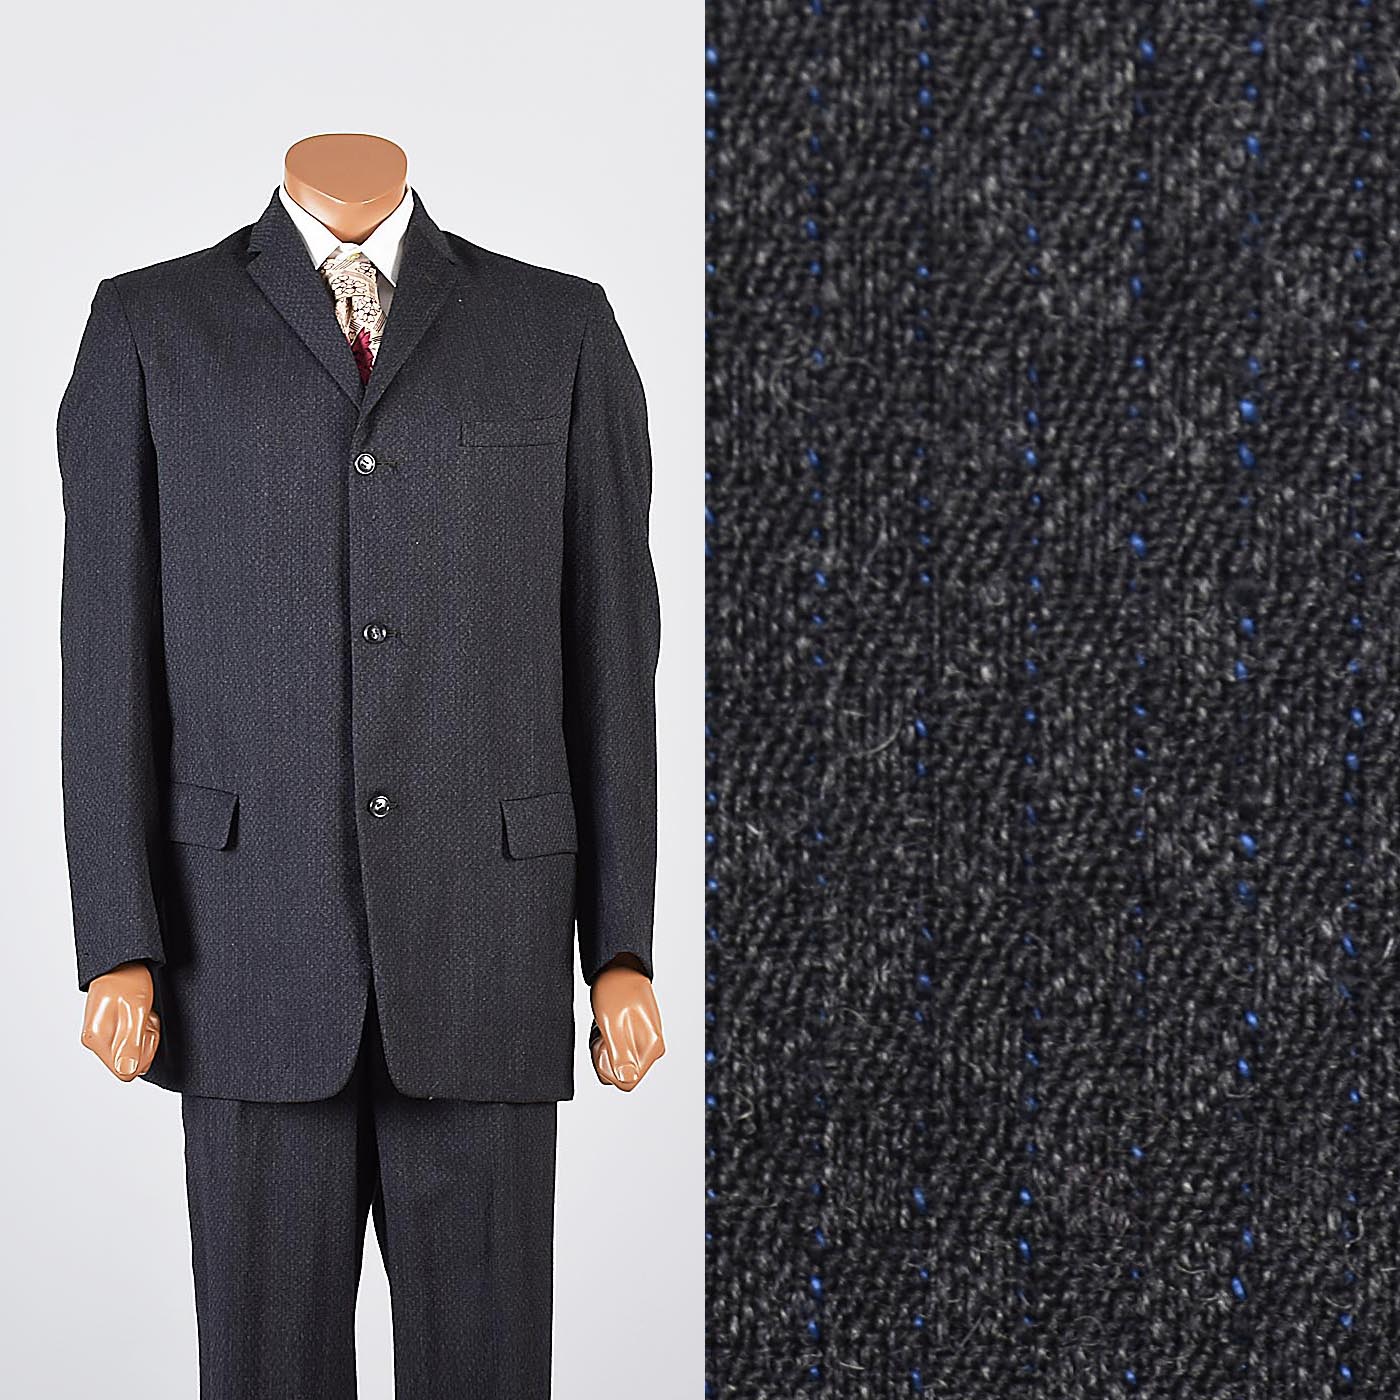 1950s Mens Two Piece Suit in Charcoal Gray